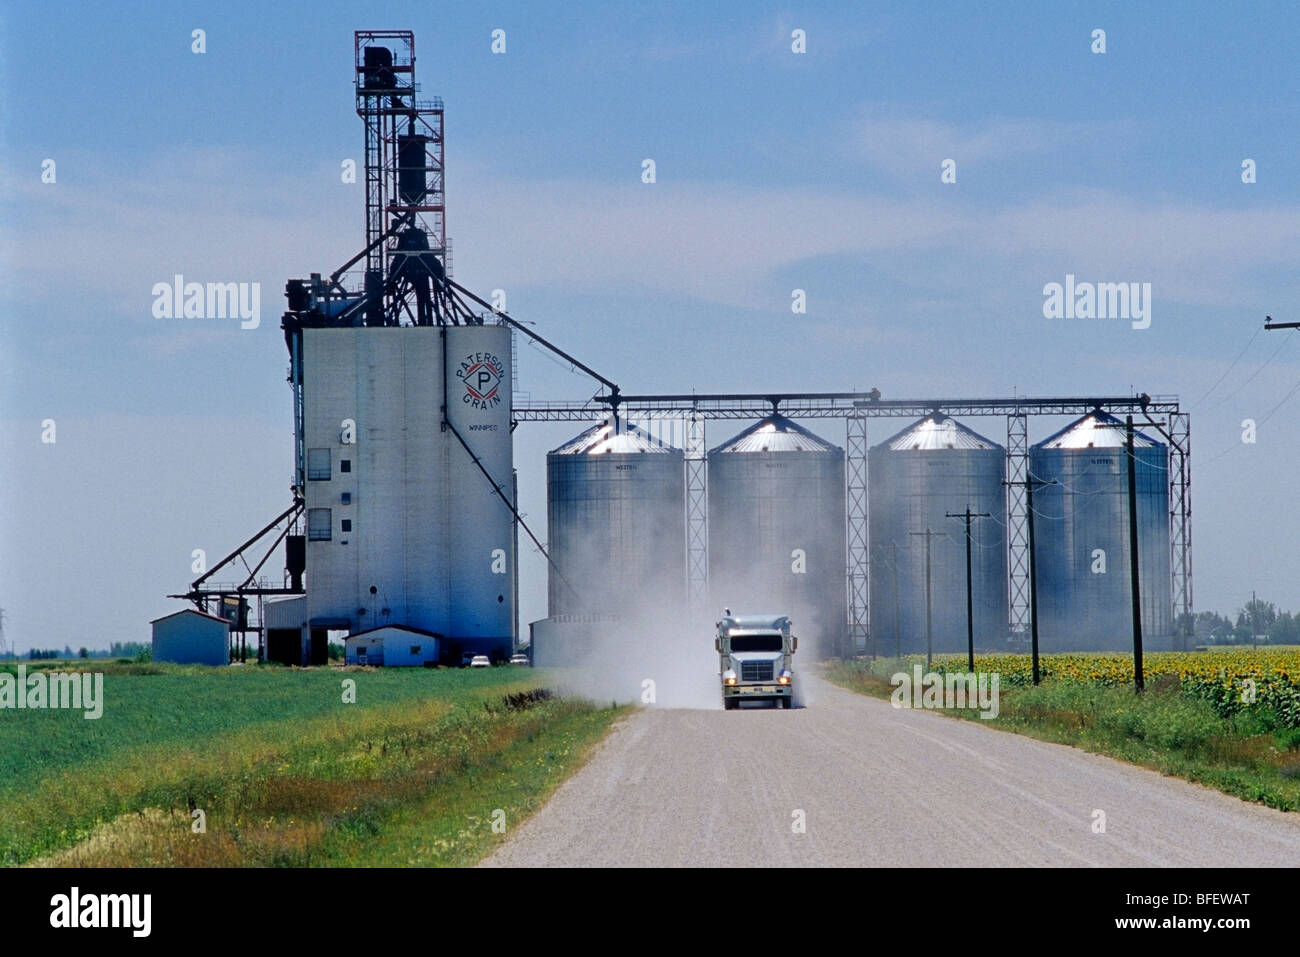 A grain truck leaves an inland grain terminal after delivering a load of grain near Winnipeg, Manitoba, Canada Stock Photo